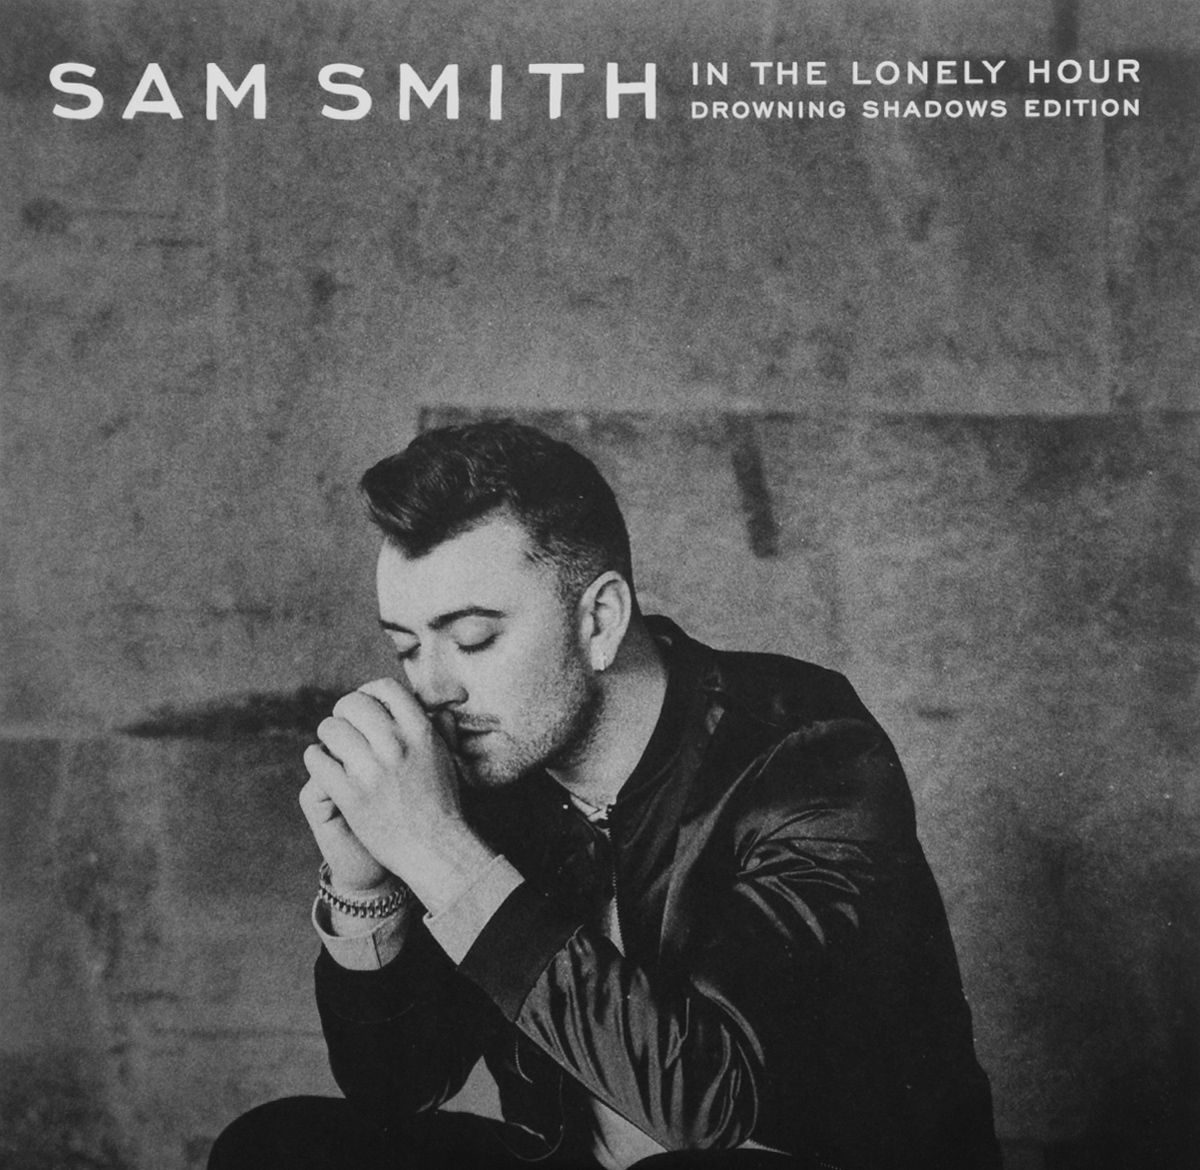 Sam Smith. In The Lonely Hour. Drowning Shadows Edition (2 LP)